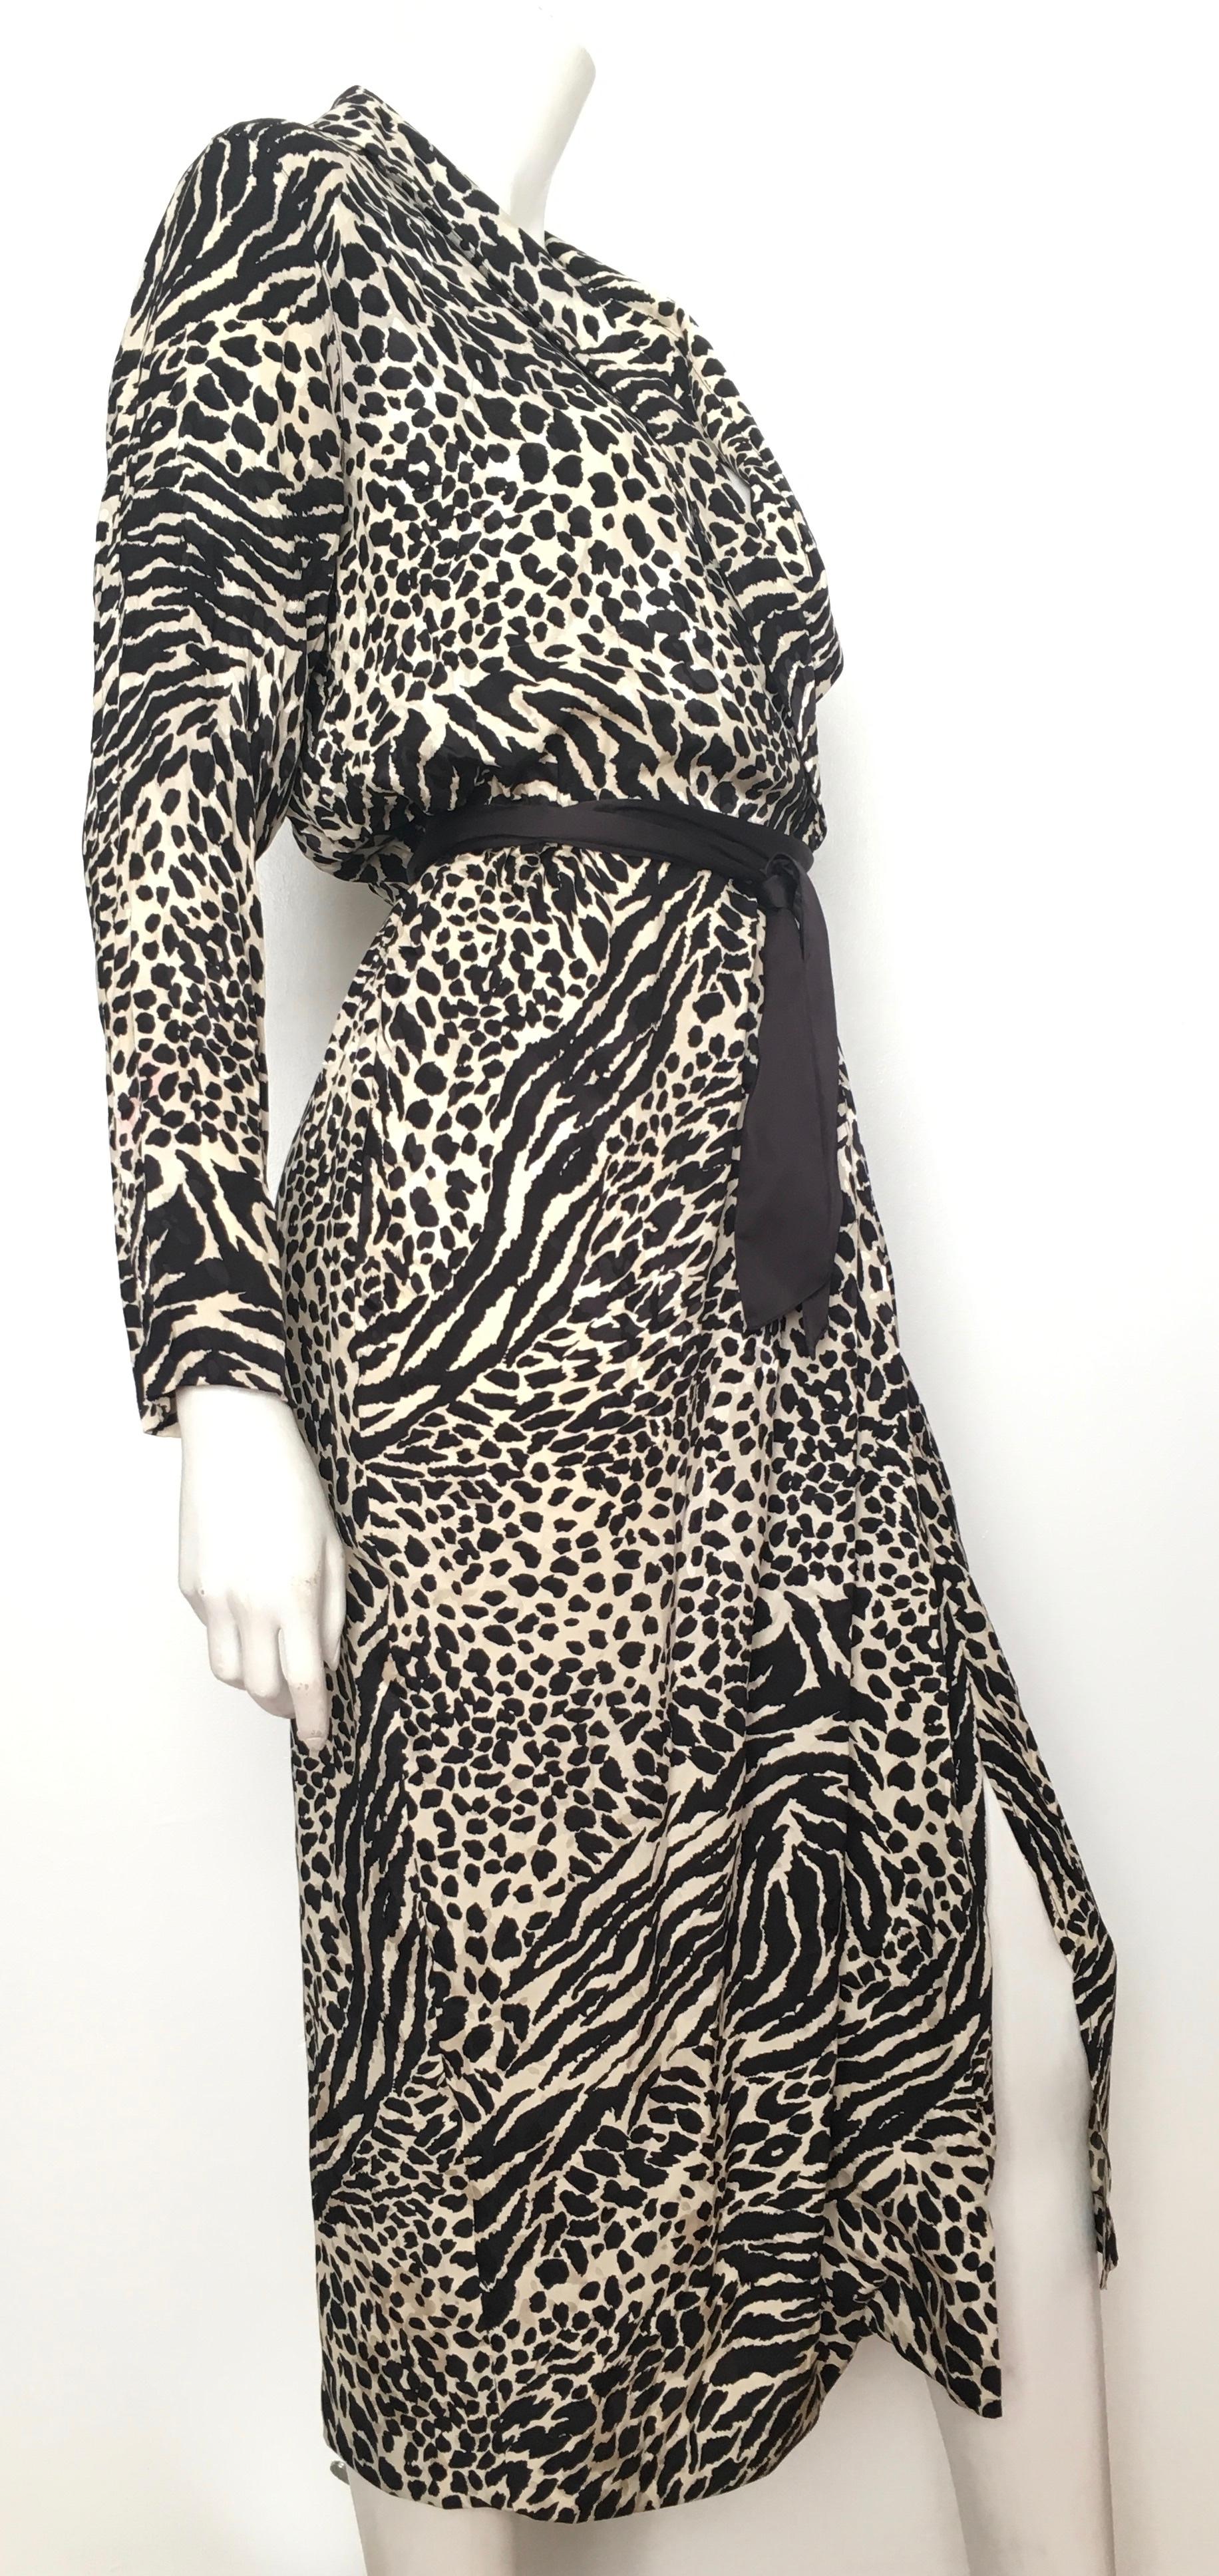 Geoffrey Beene for Lillie Rubin 1980 Animal Print Silk Dress Size 6. In Excellent Condition For Sale In Atlanta, GA